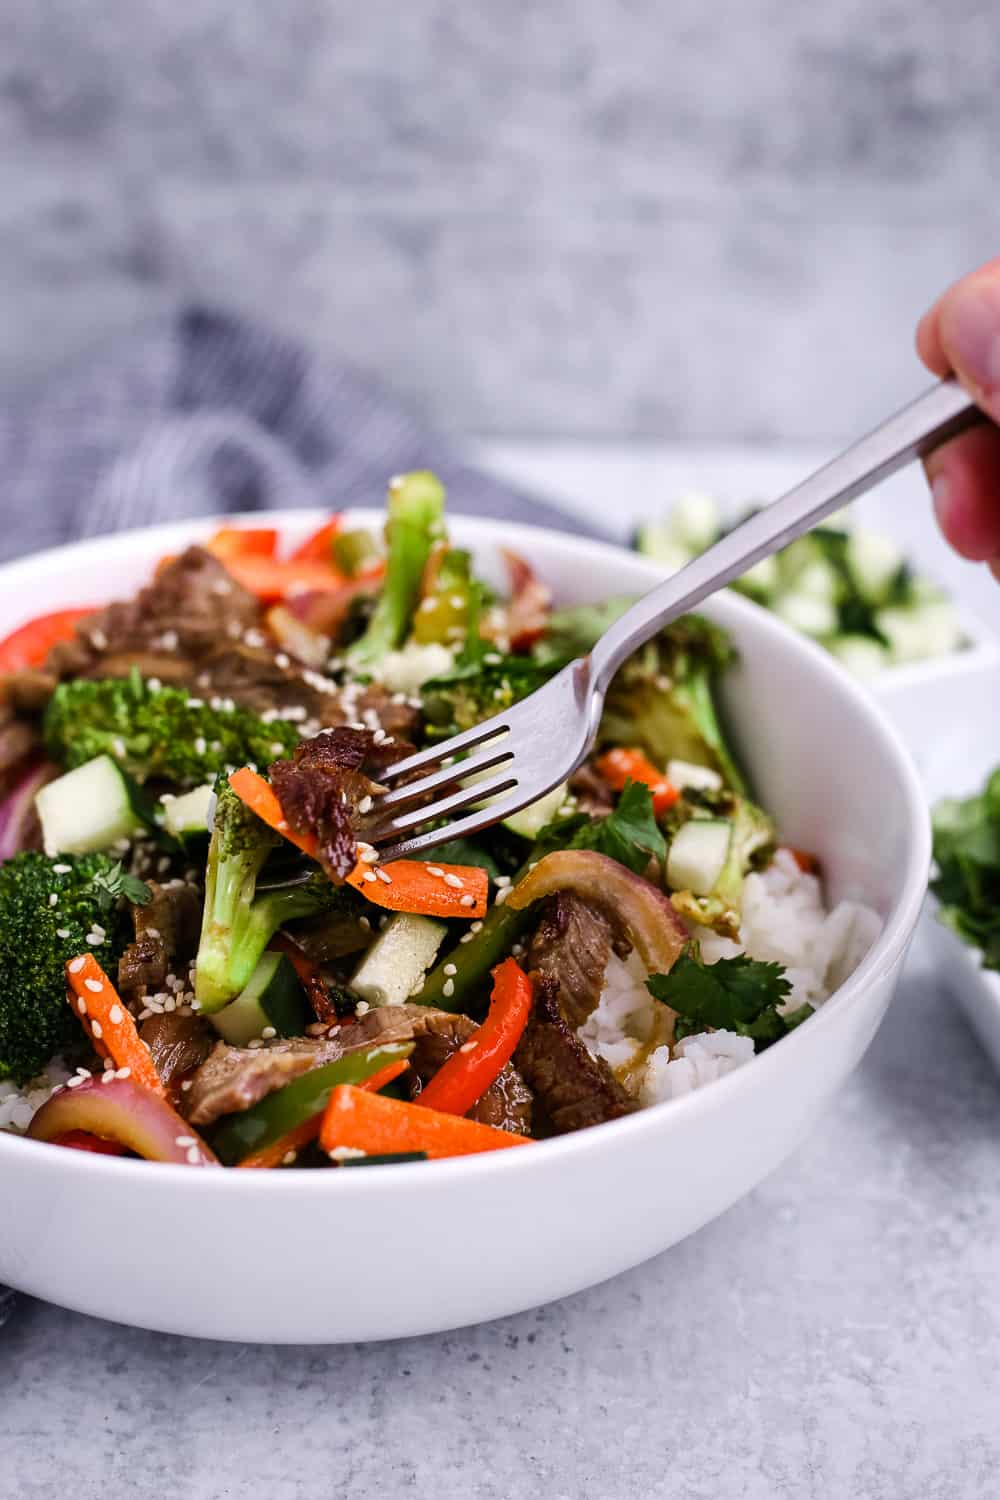 Skirt steak stir fry with veggies in a white bowl with rice and a fork